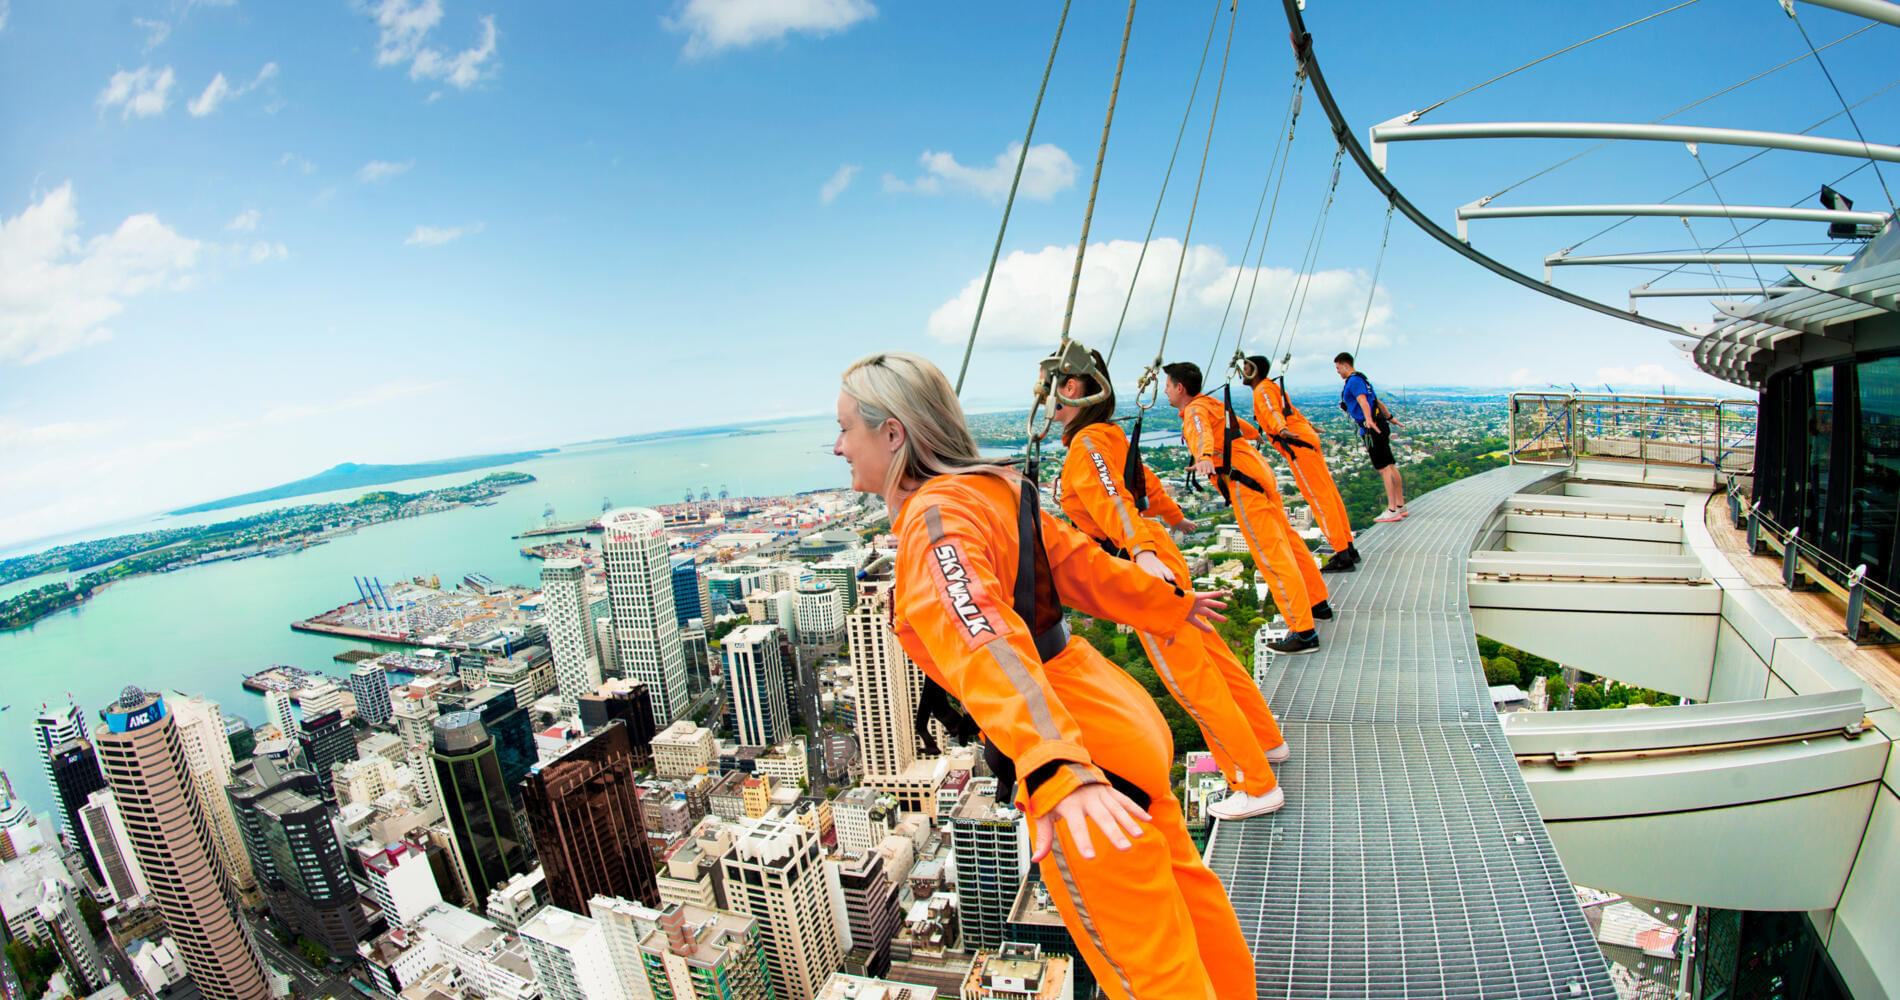 Indulge in SkyJump and SkyWalk